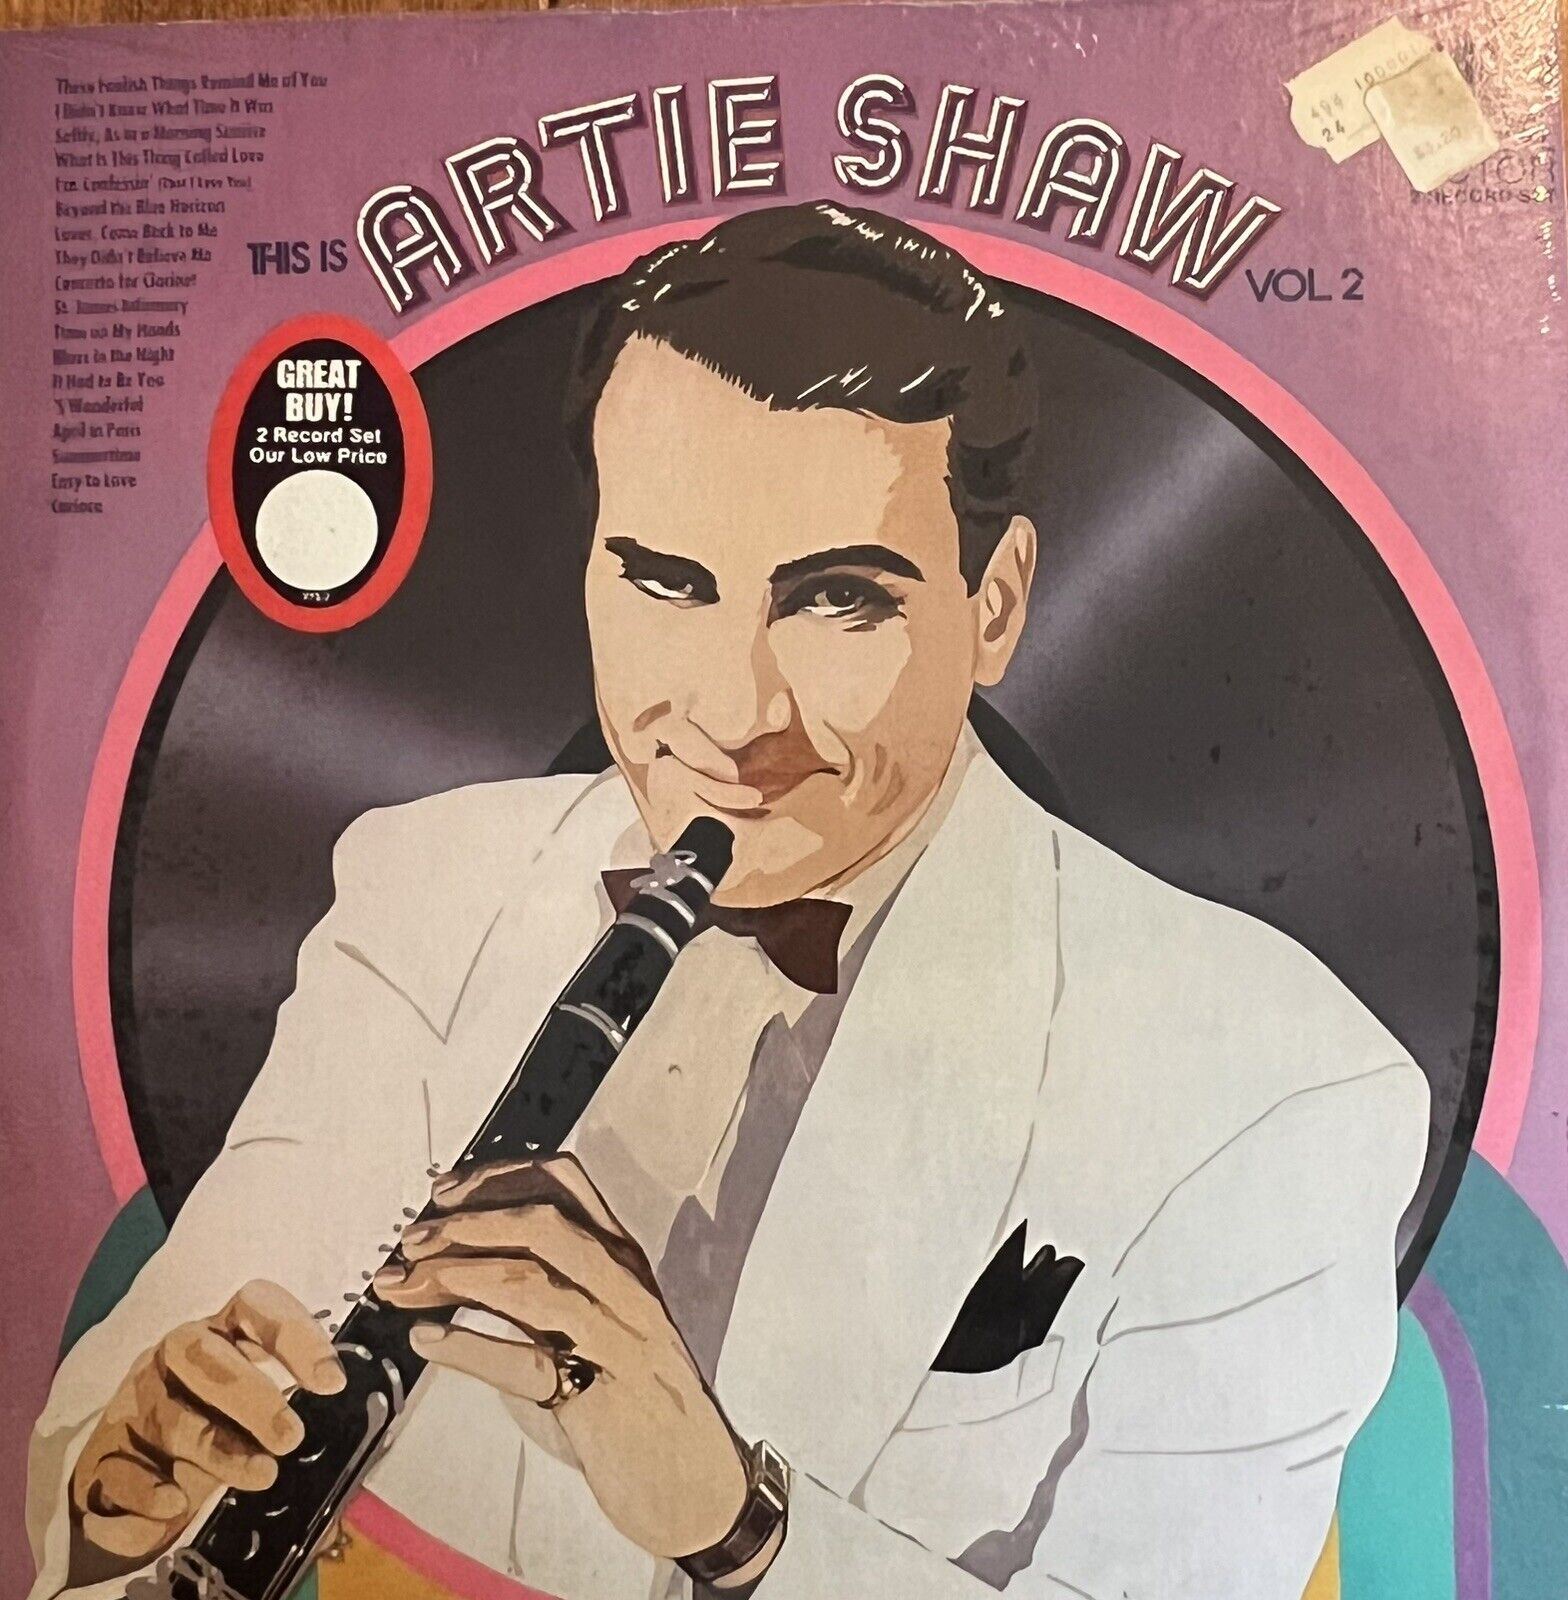 COOL BEANS BLOWOUT: This is Artie Shaw Vol 2 RARE SEALED Record RCA